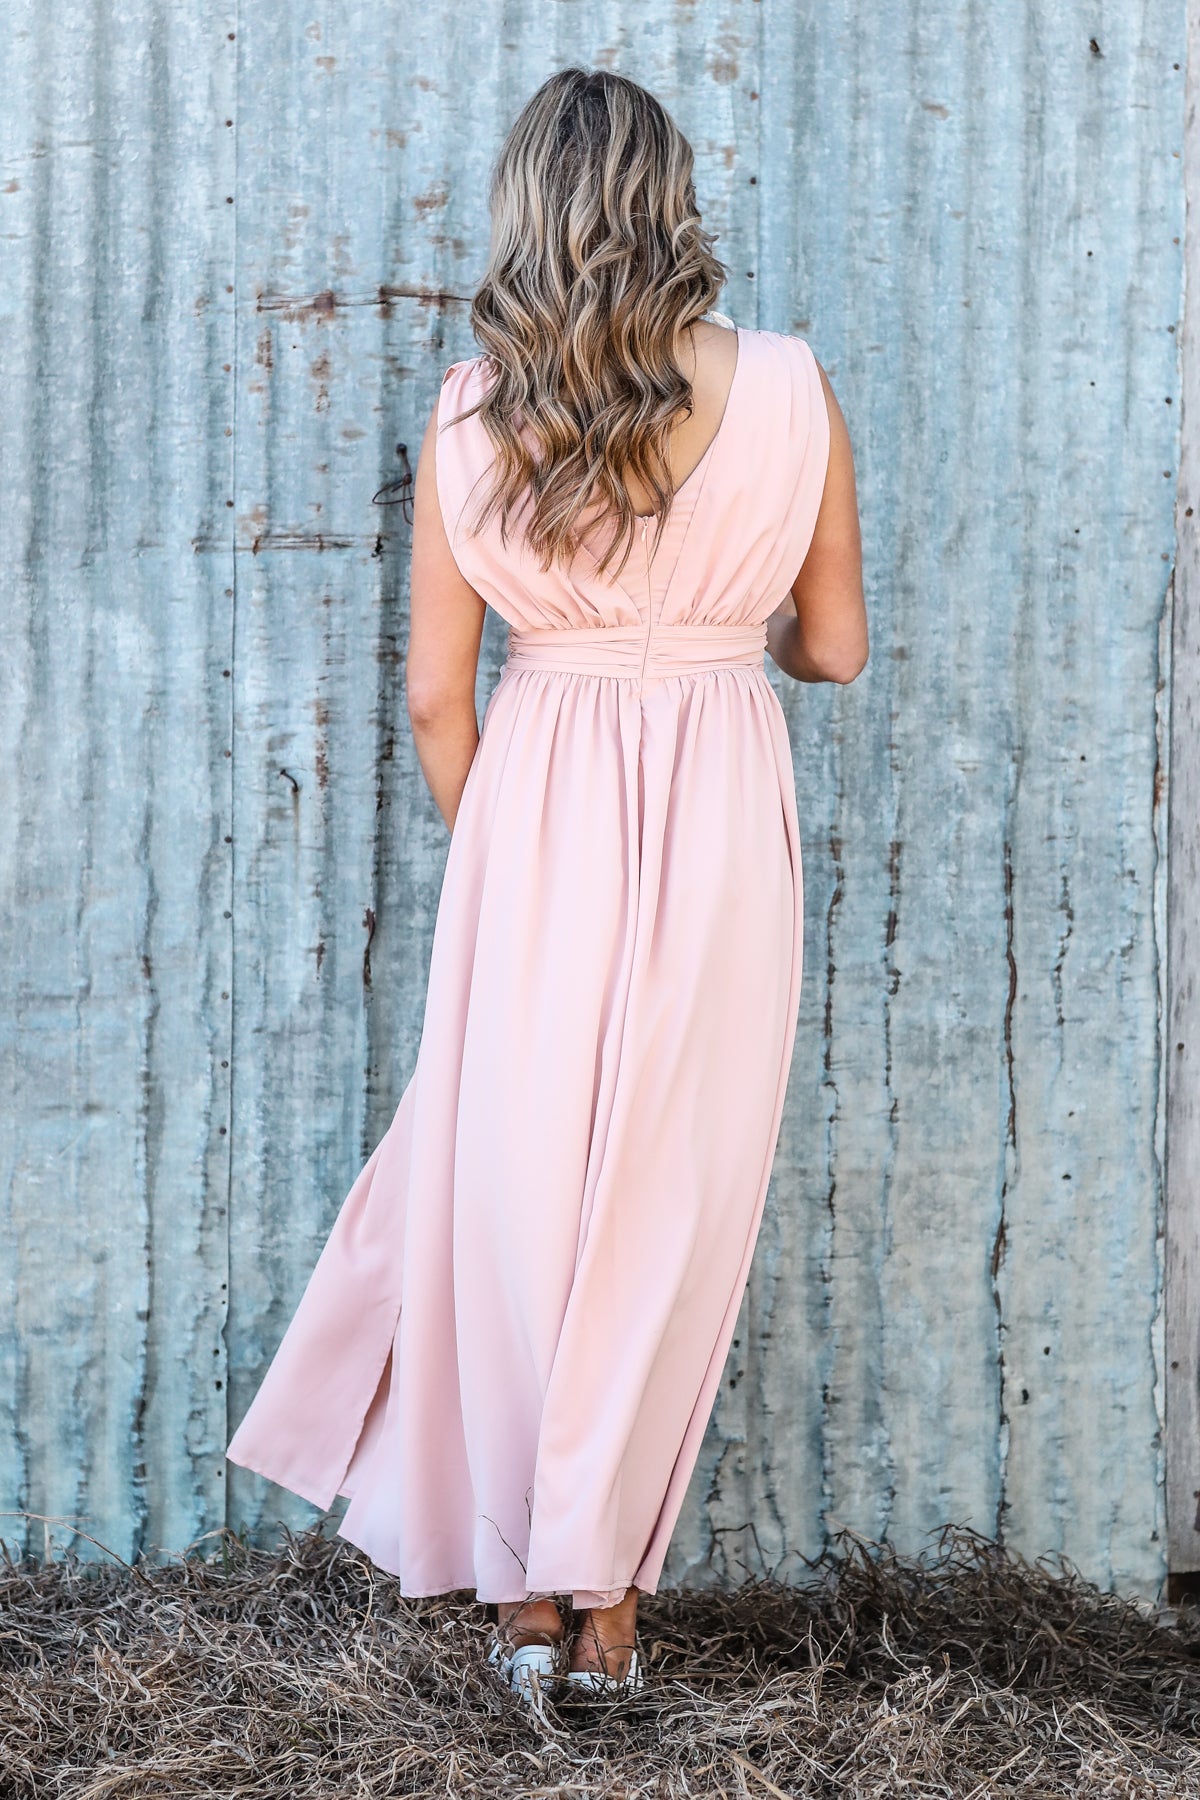 Peach and White Lace Trim Maxi Dress - Filly Flair